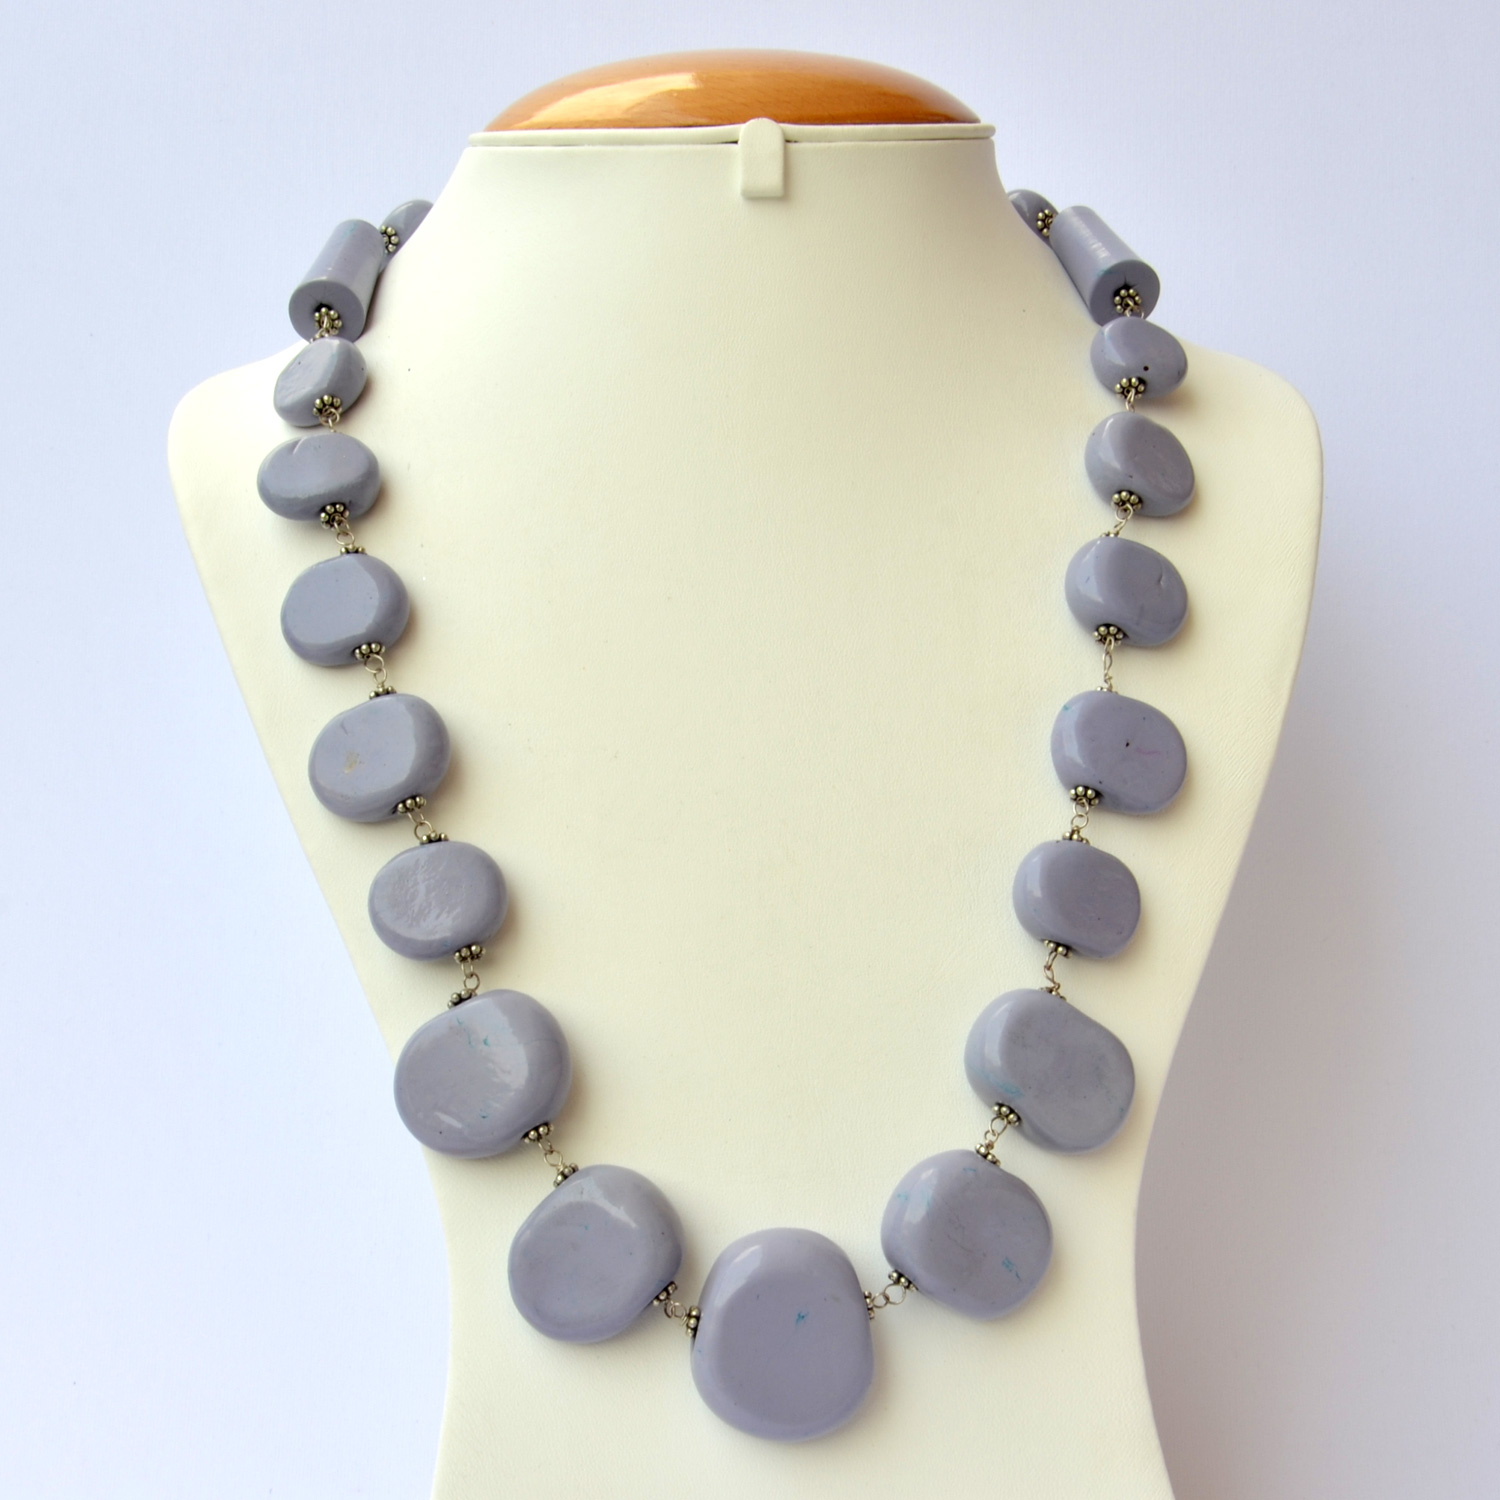 Handmade Necklace with Blue Lac Beads in Flat Shape | Maruti Beads